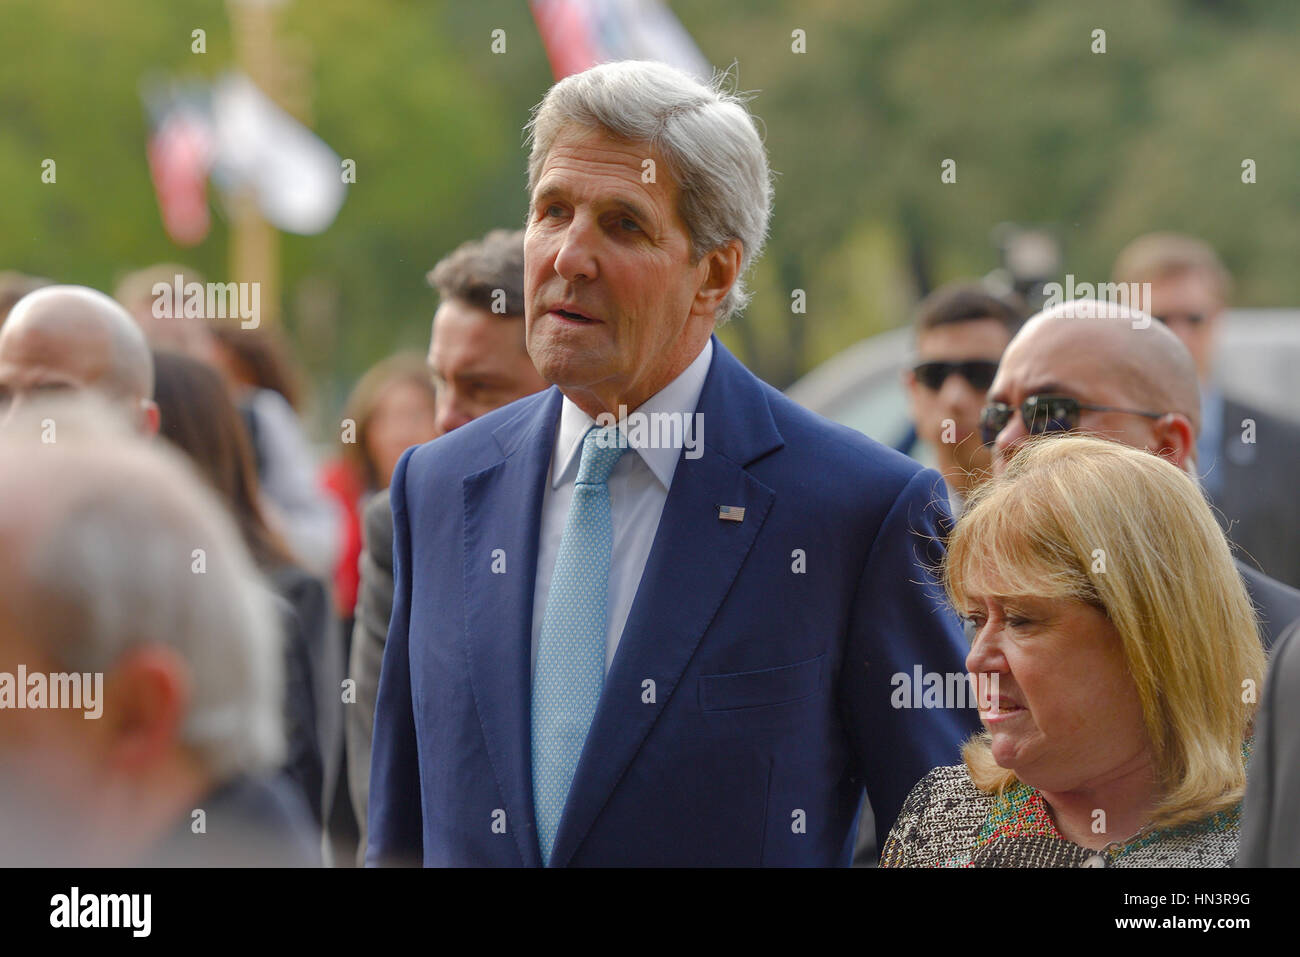 Buenos Aires, Argentinien - 4. August 2016: United States Secretary Of State John Kerry (L) und Argentinean Foreign Minister Susana Malcorra (R) an der Plaza San Martin. Stockfoto